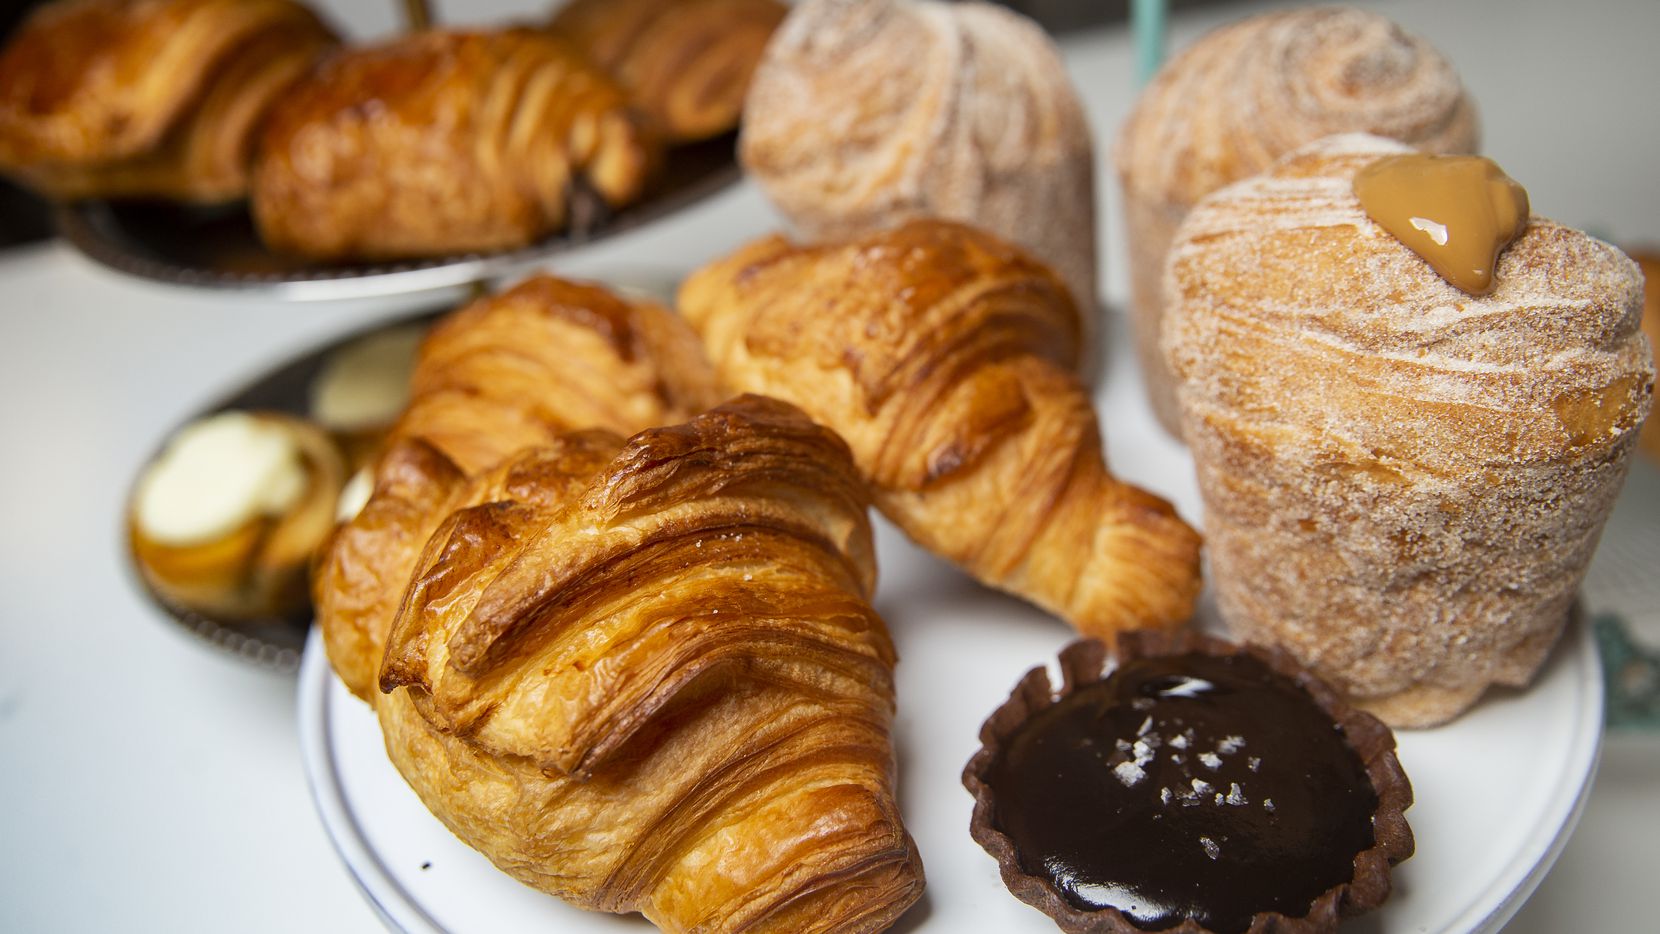 Pastries, including croissants, chocolate caramel tart and churro cruffins, at La Casita...